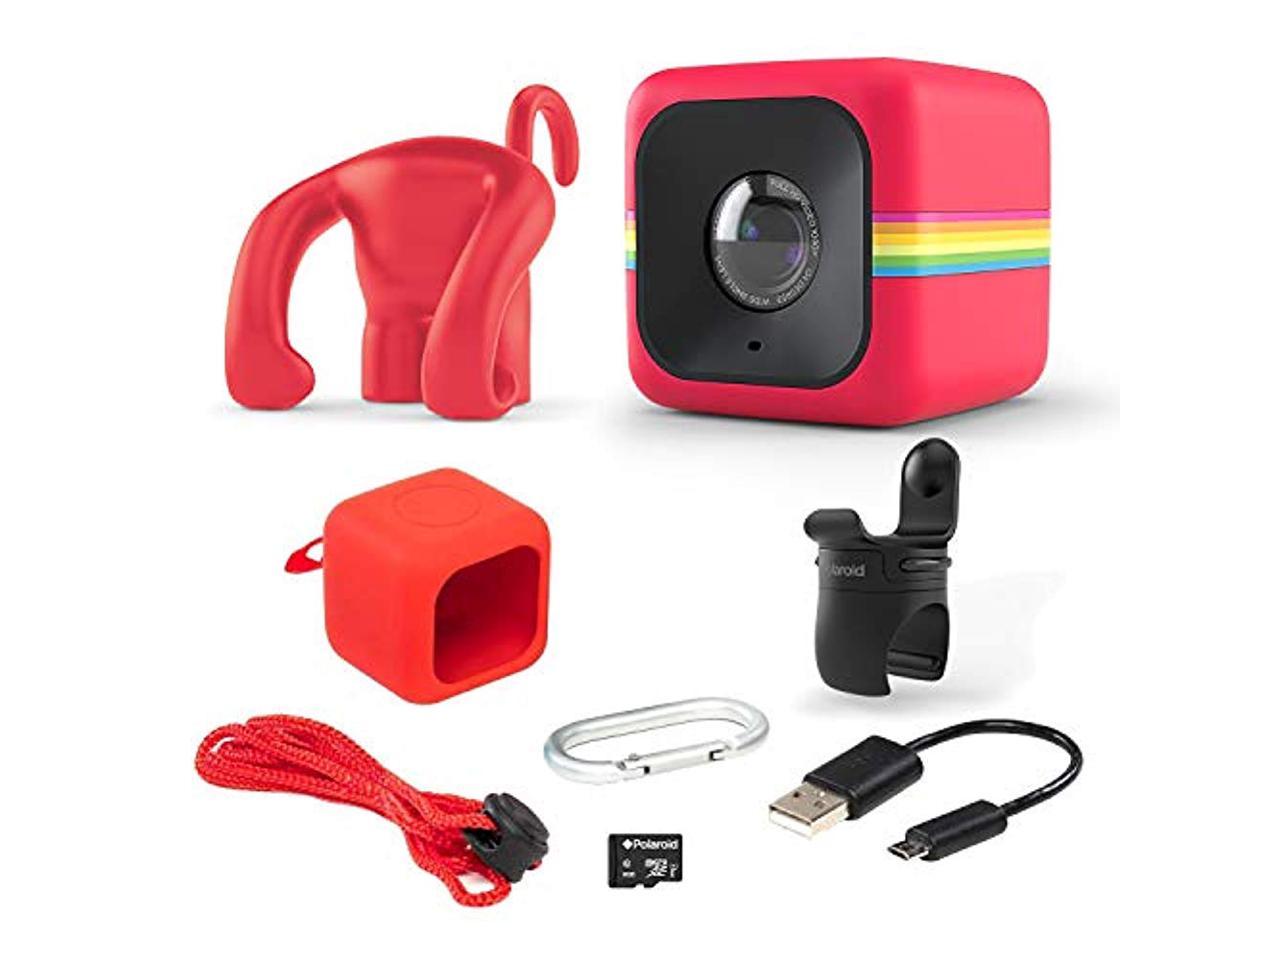 Polaroid Lifestyle Cube Act Two Hd 1080p Waterproof Action Underwater Wide Angle Sports Video Mini Camera Bundle Red Newegg Com